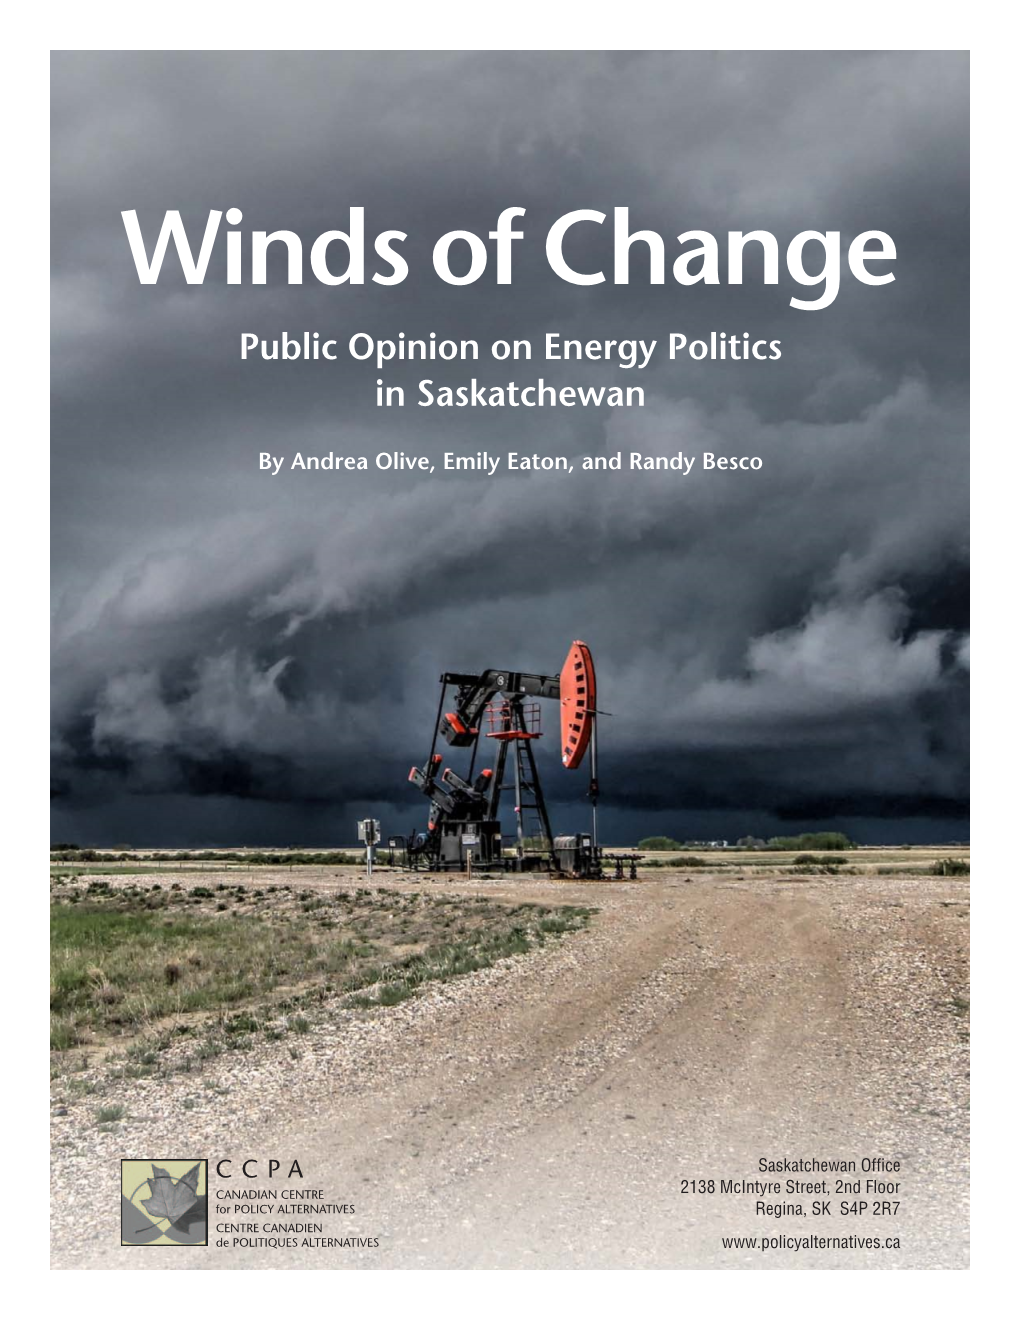 Winds of Change: Public Opinion on Energy Politics in Saskatchewan by Andrea Olive, Emily Eaton, and Randy Besco April 2018